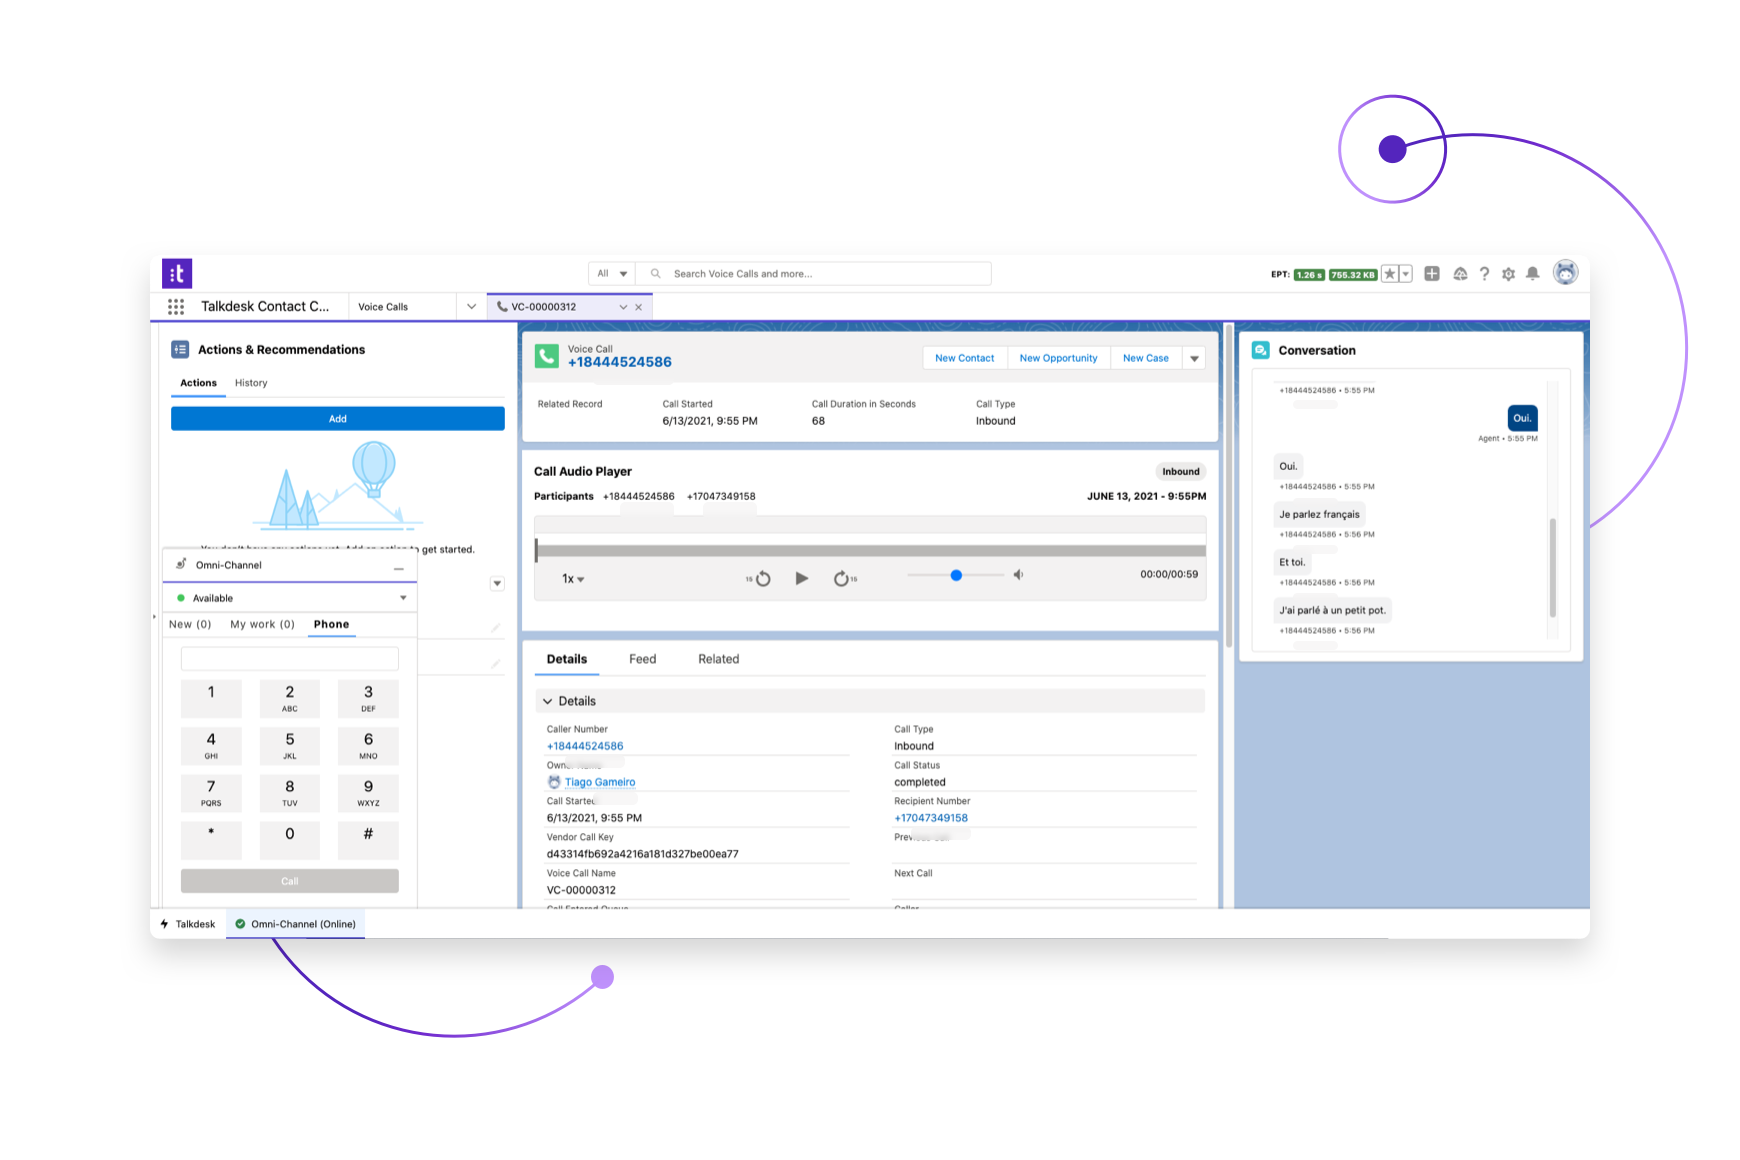 Improve CRM with full contact center functionality inside Salesforce with Talkdesk for Salesforce.